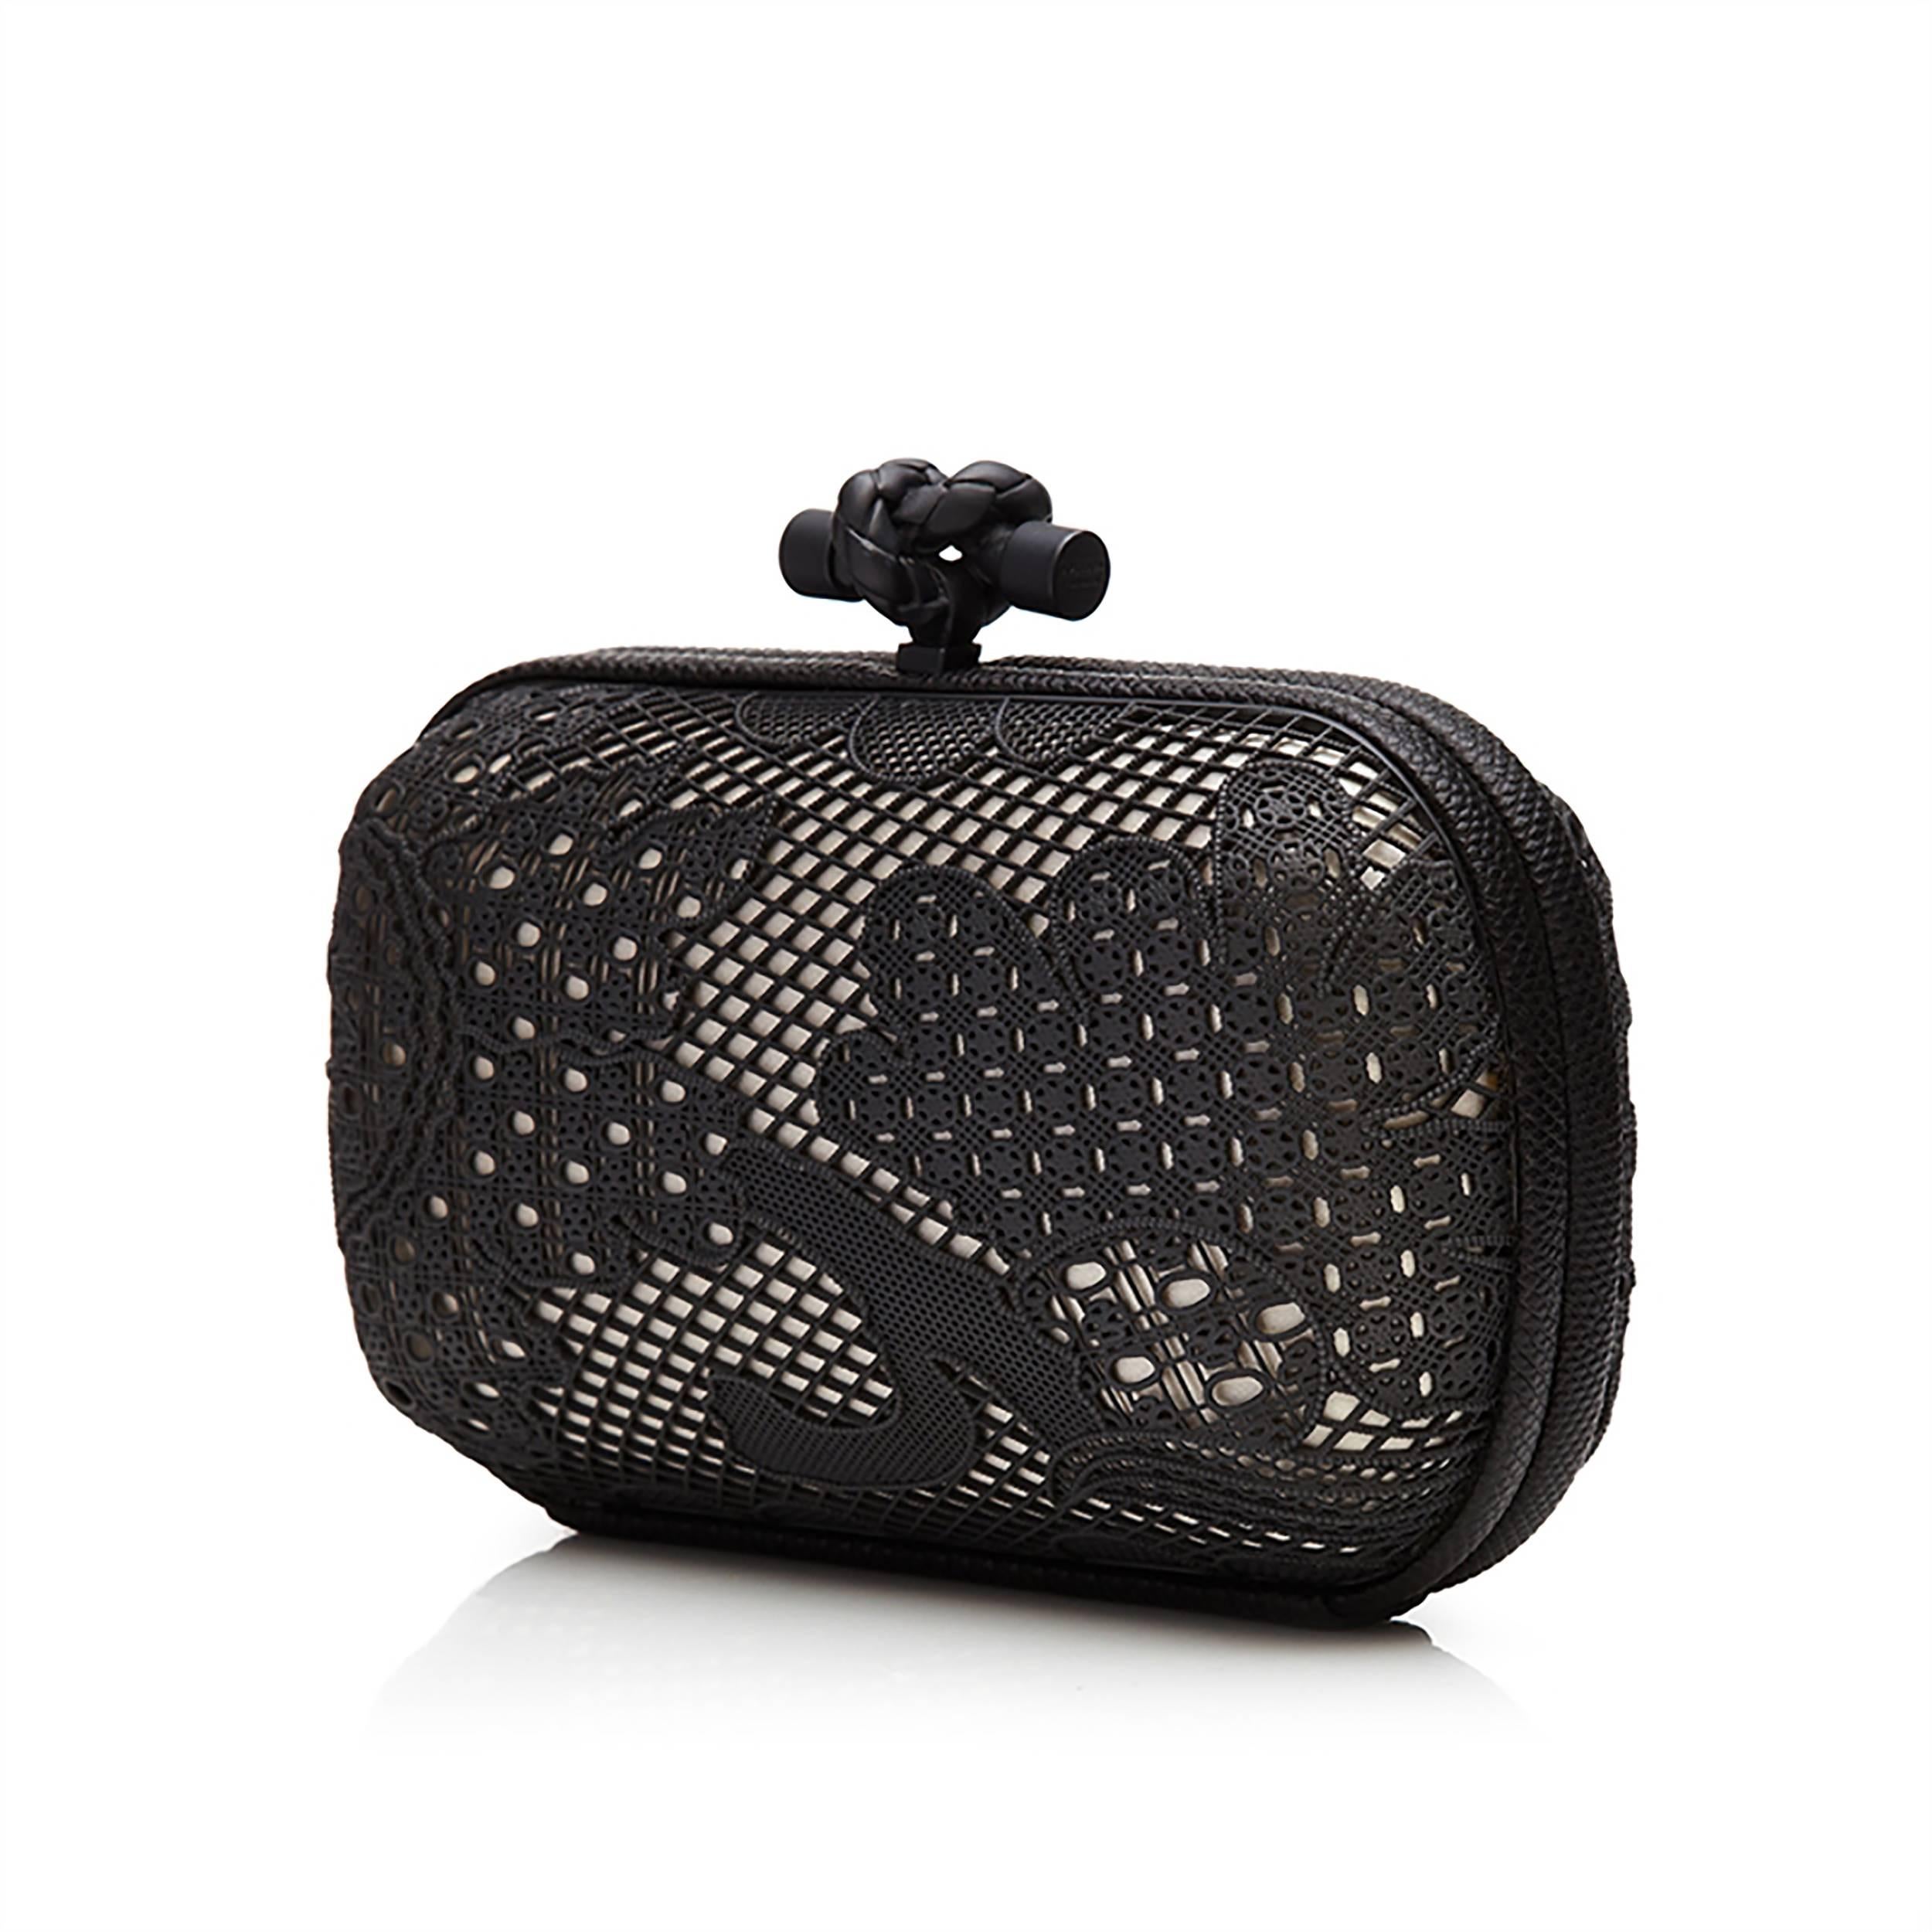 This feminine reimagining of Bottega Veneta's famed Knot clutch bag is adorned with an ornate metal overlay resembling lace. Beautifully intricate in its construction, its monochrome exterior is finished with Bottega Veneta's ubiquitous knot-shaped